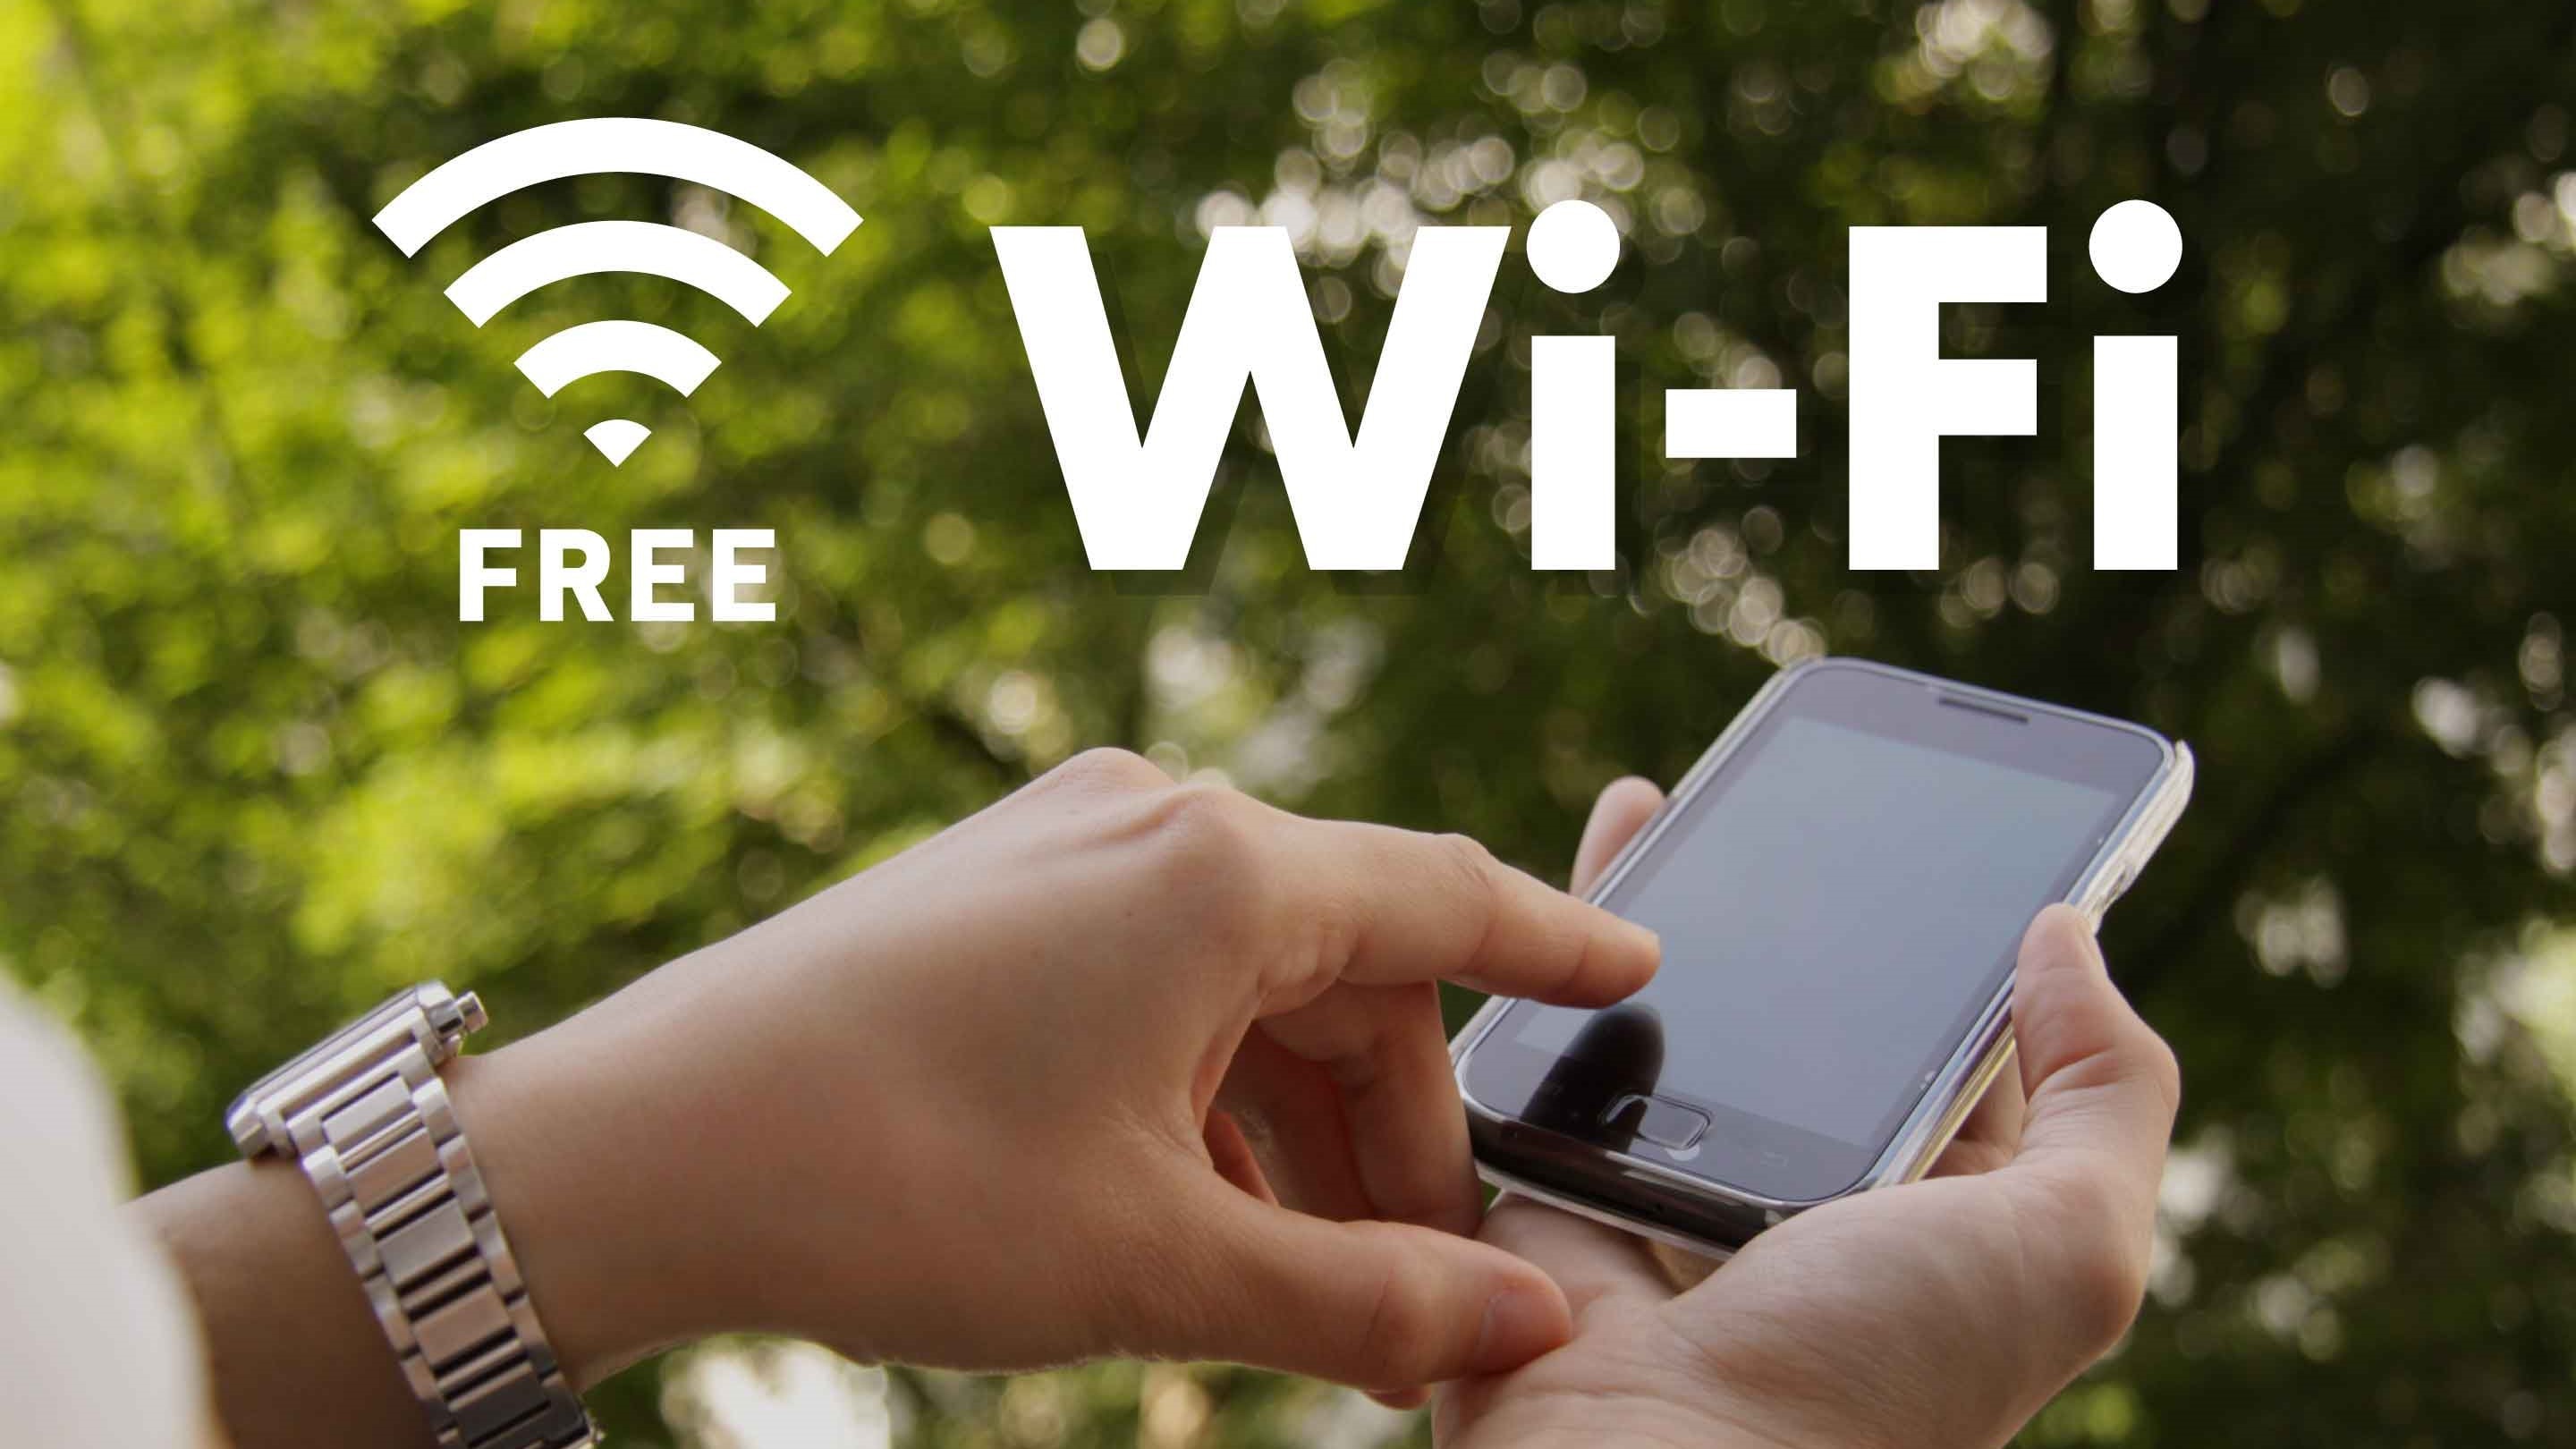 Wi-Fi available (entire area, free of charge)